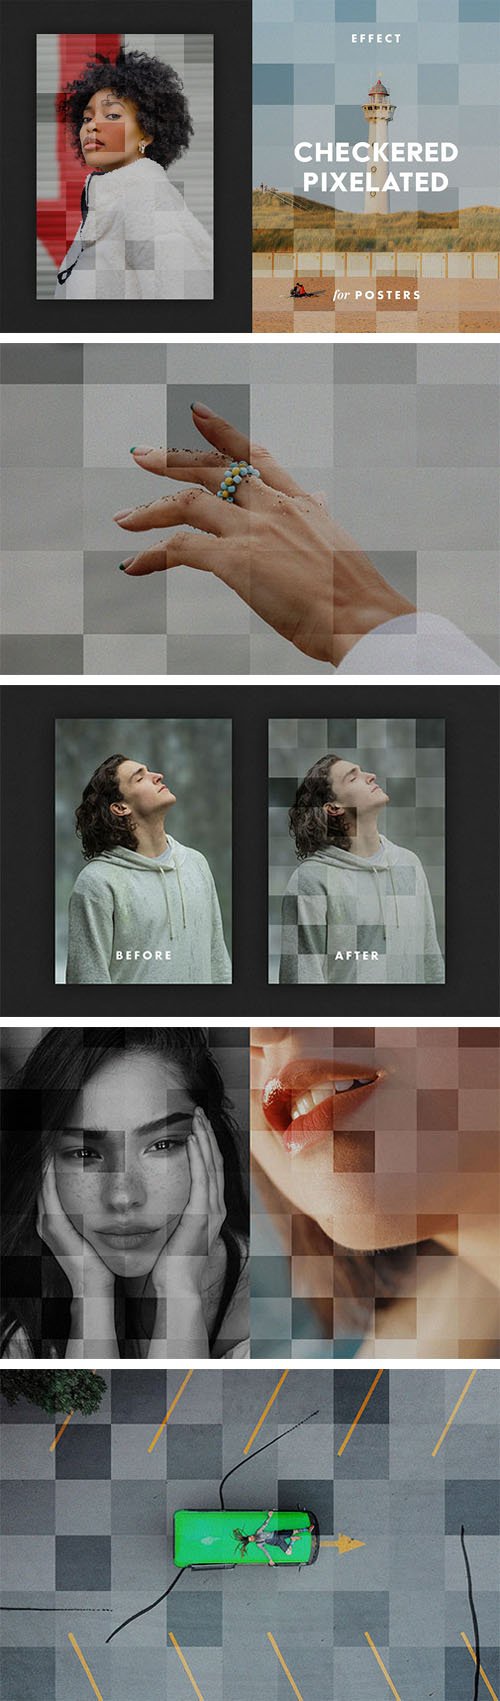 Checkered Pixelated Poster Effects for Photoshop